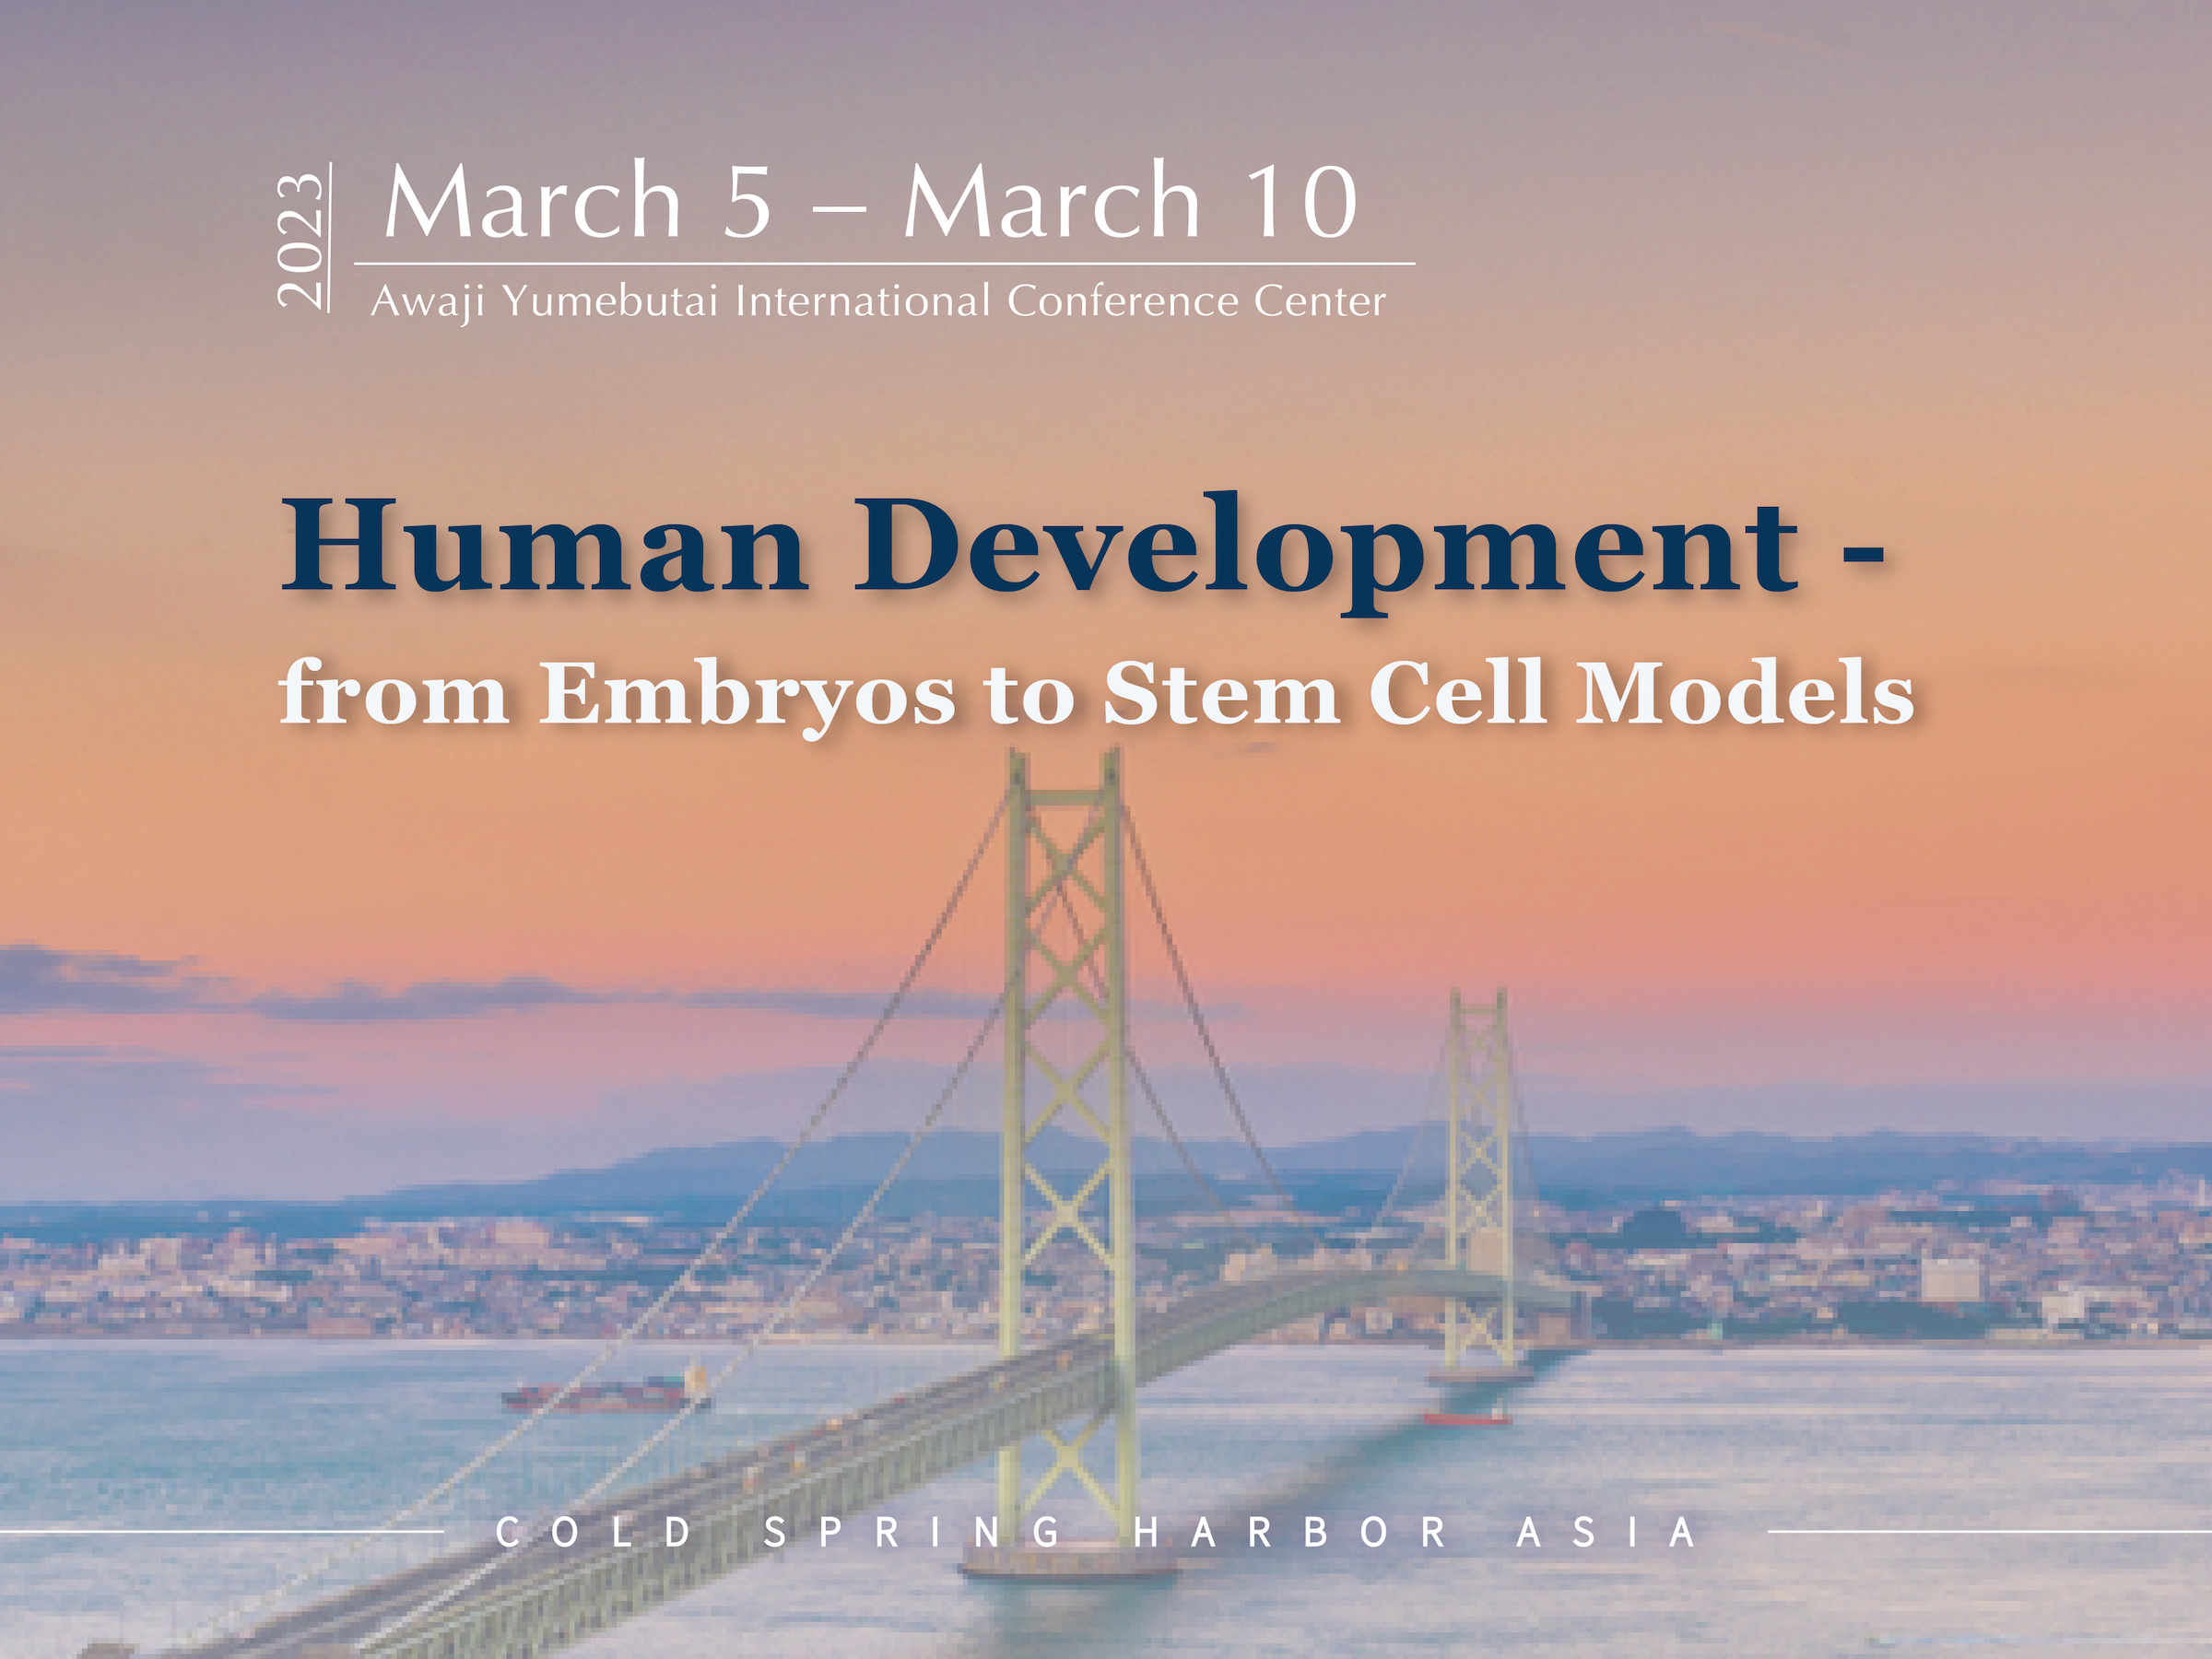 Cold Spring Harbor Asia Conference on “Human Development – from Embryos to Stem Cell Models”